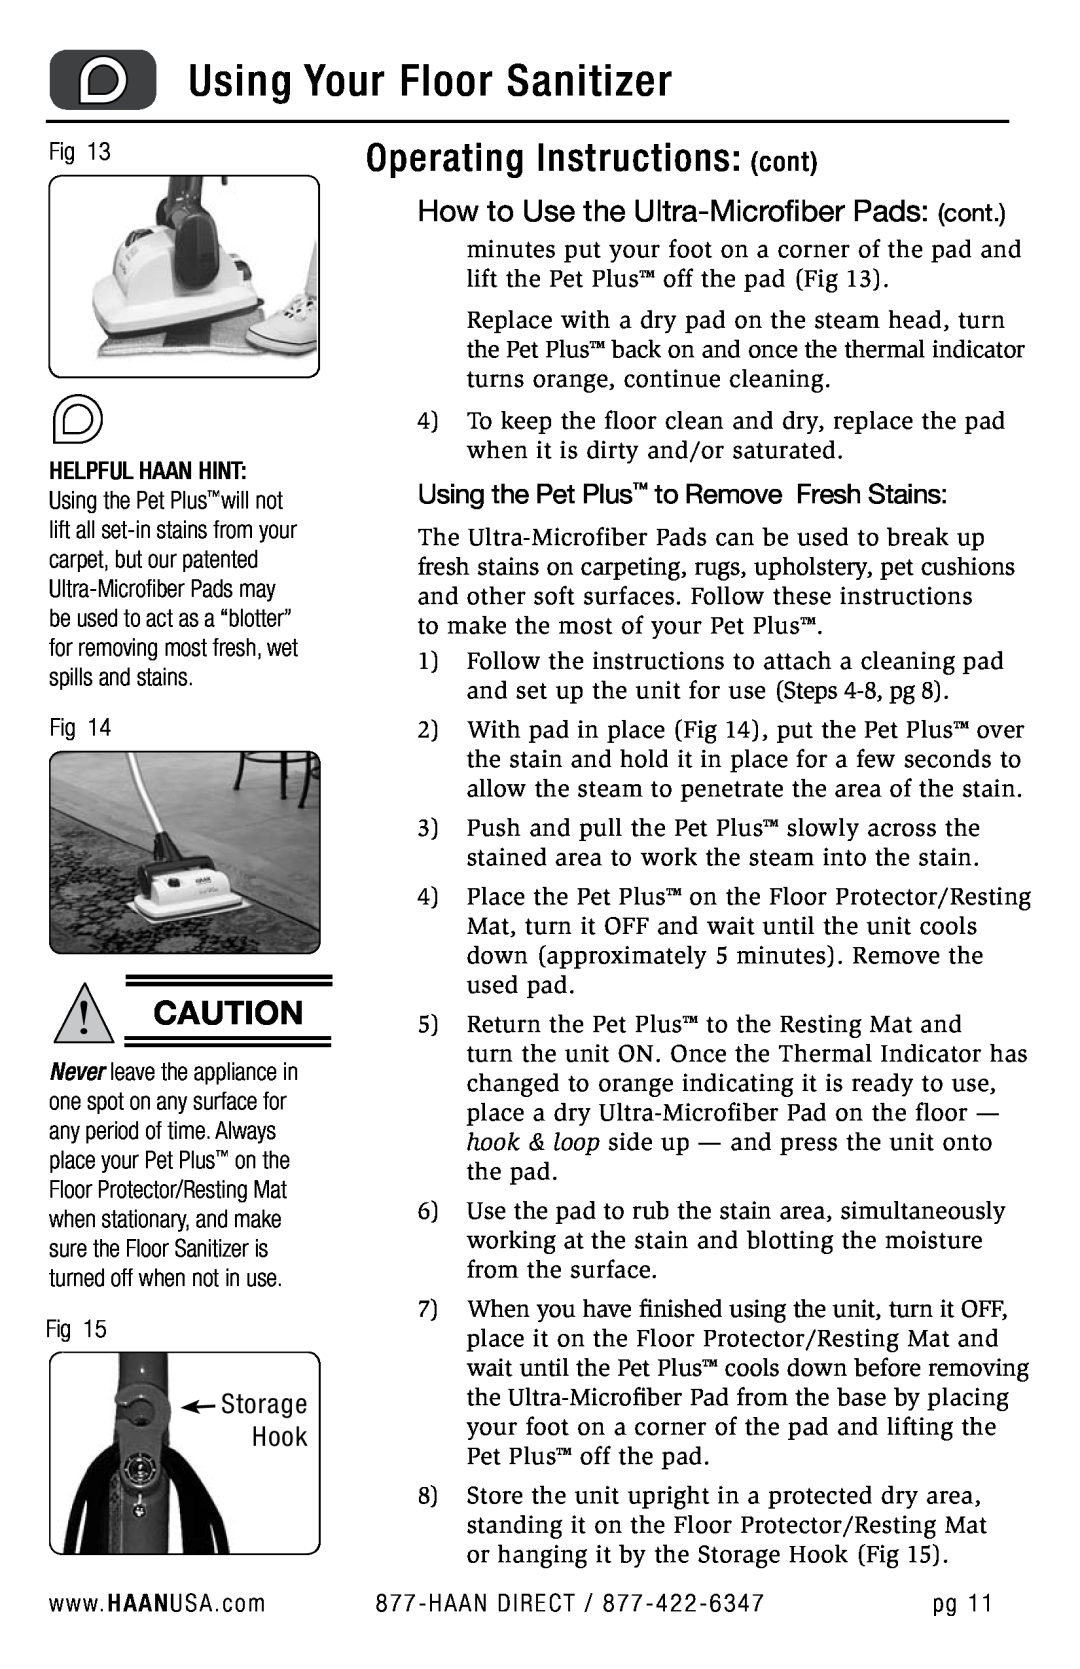 Haan FS-30P+ user manual How to Use the Ultra-Microfiber Pads cont, Storage Hook, Using the Pet Plus to Remove Fresh Stains 